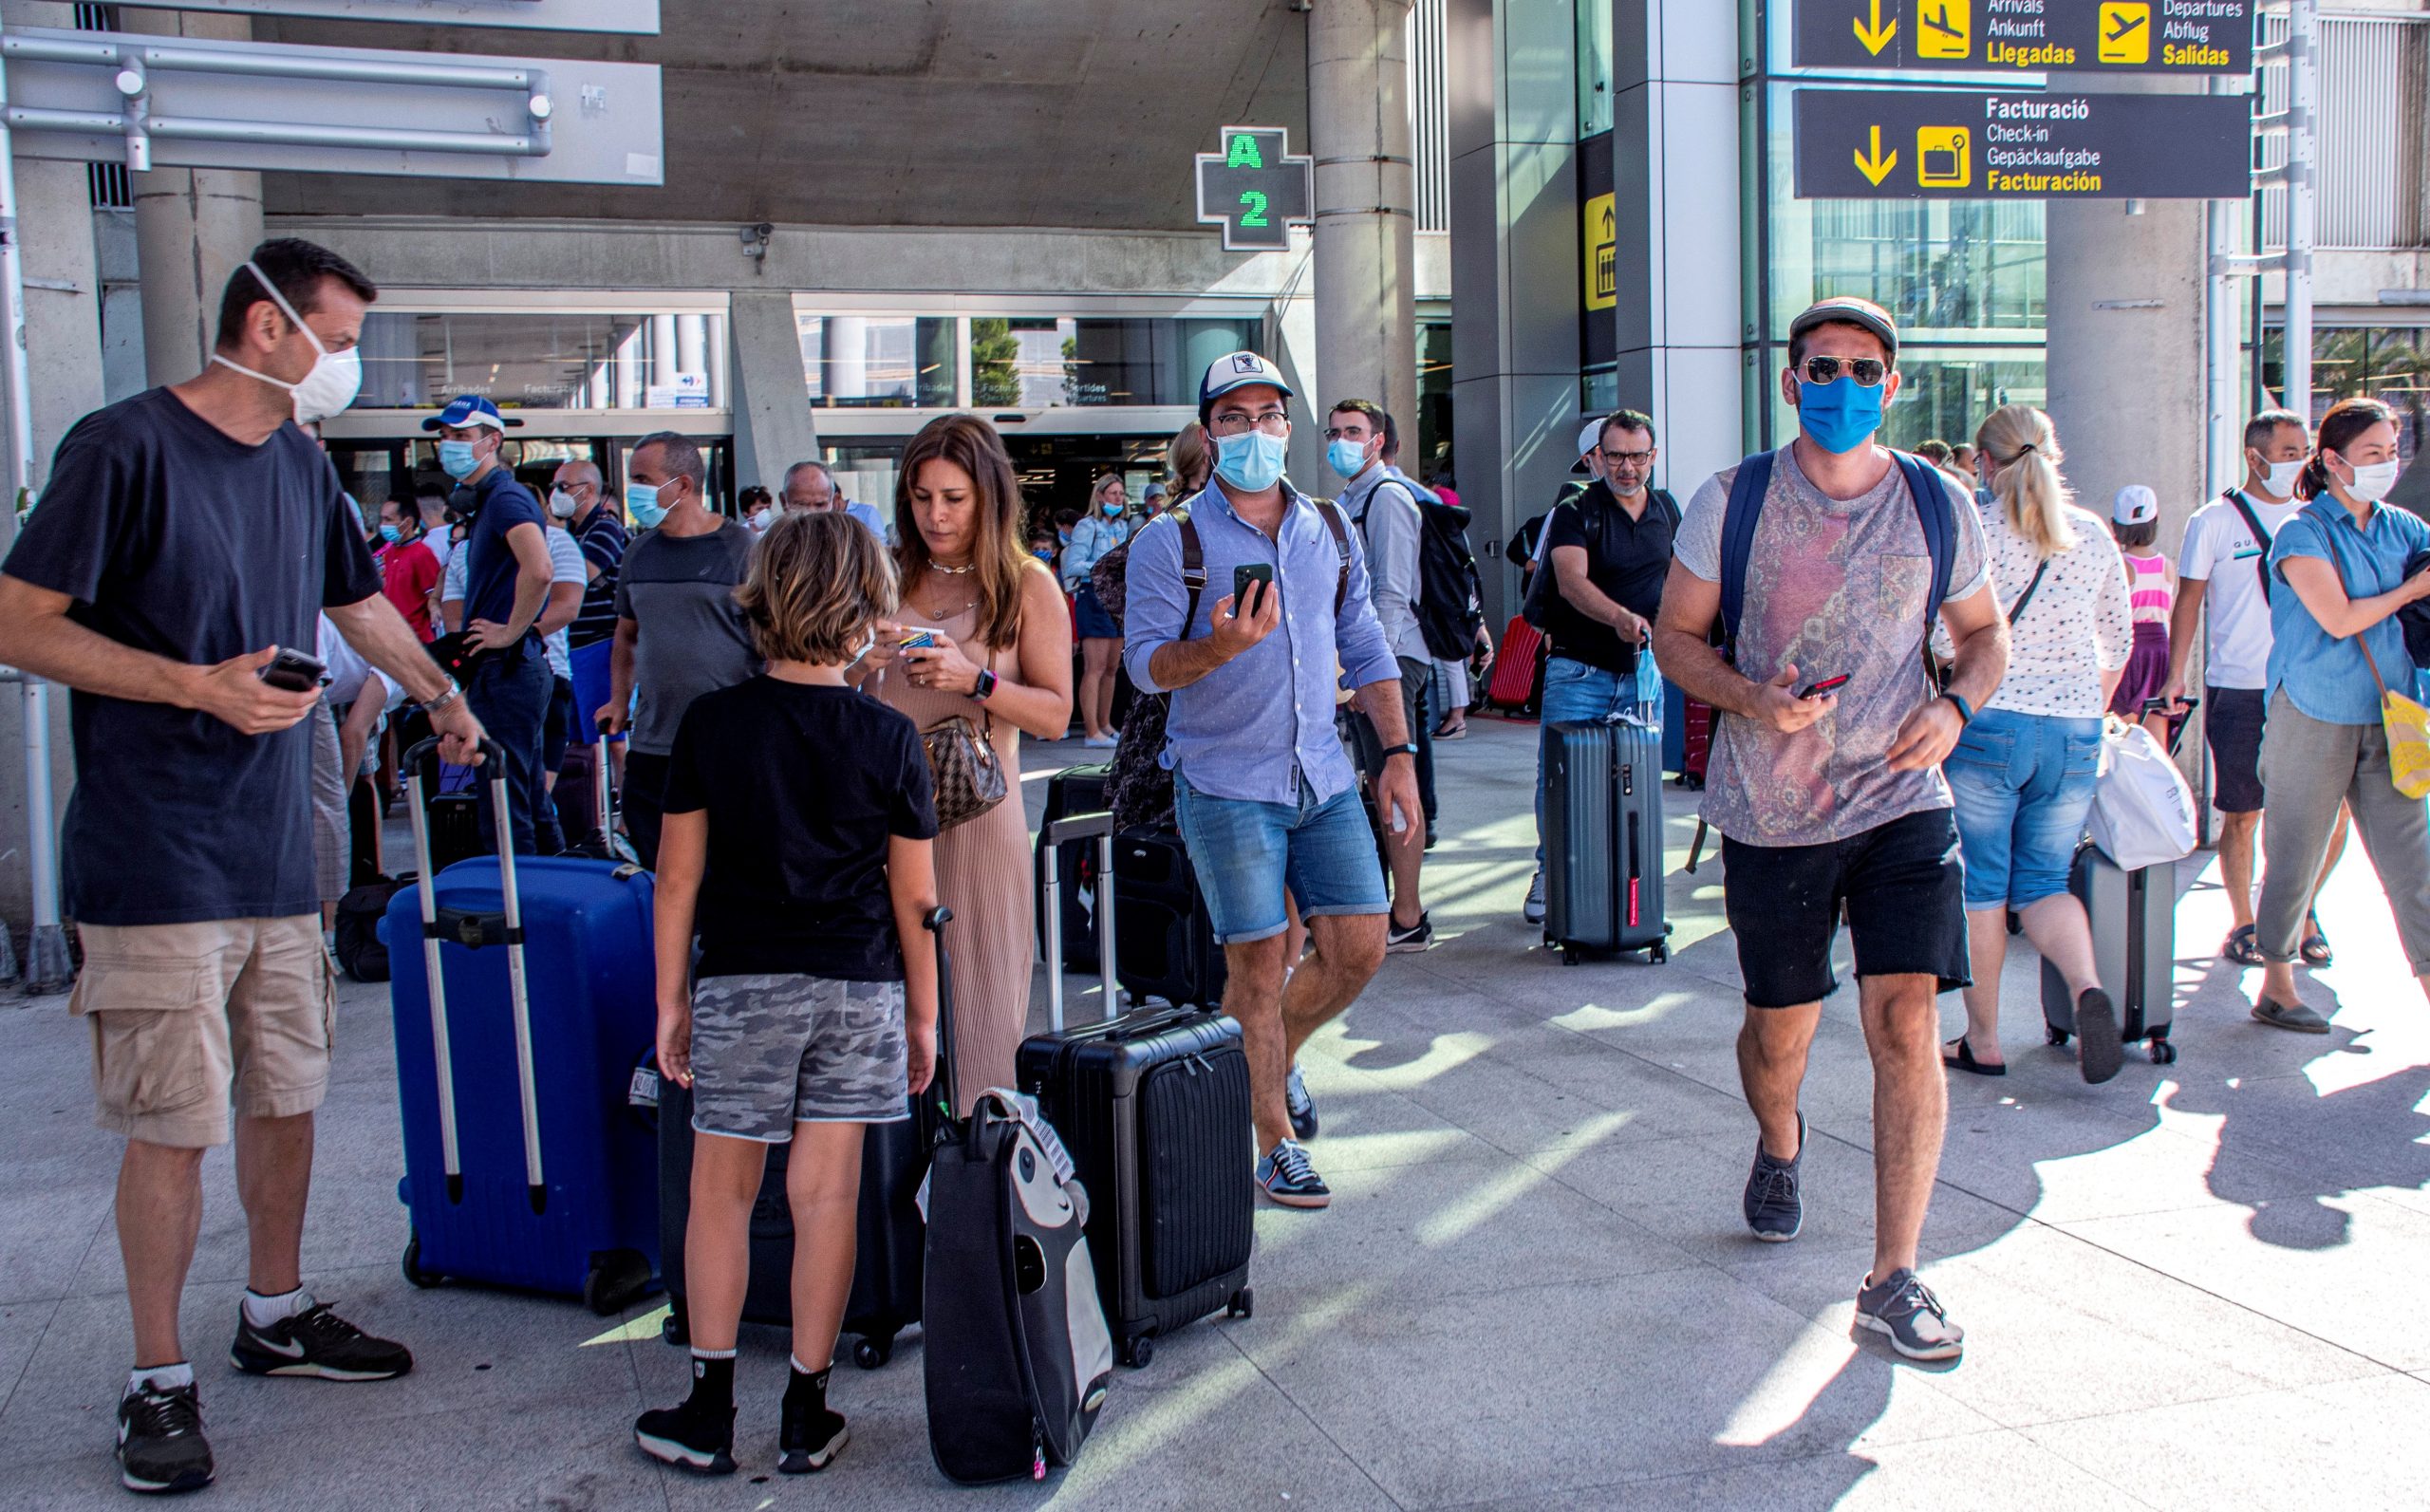 epa08593850 Tourists arrive at the Son Sant Joan airport in Palma de Mallorca, Balearic Islands, Spain, 09 August 2020. Over 270 flights are expected to land and other 270 expected to take off during the day.  EPA/CATI CLADERA